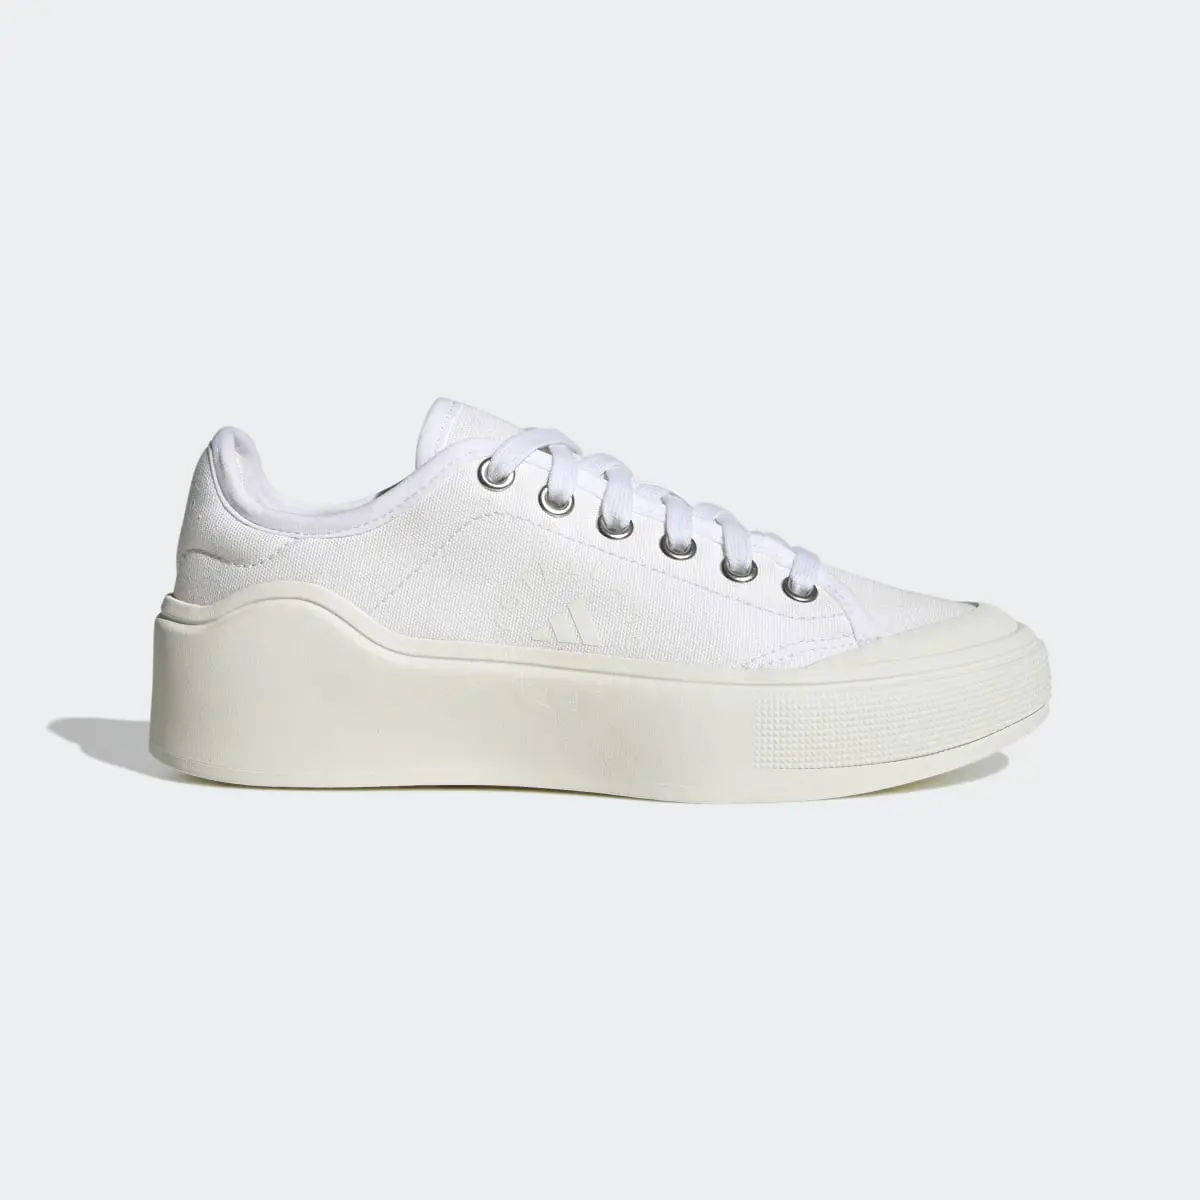 Adidas by Stella McCartney Court Shoes. 2